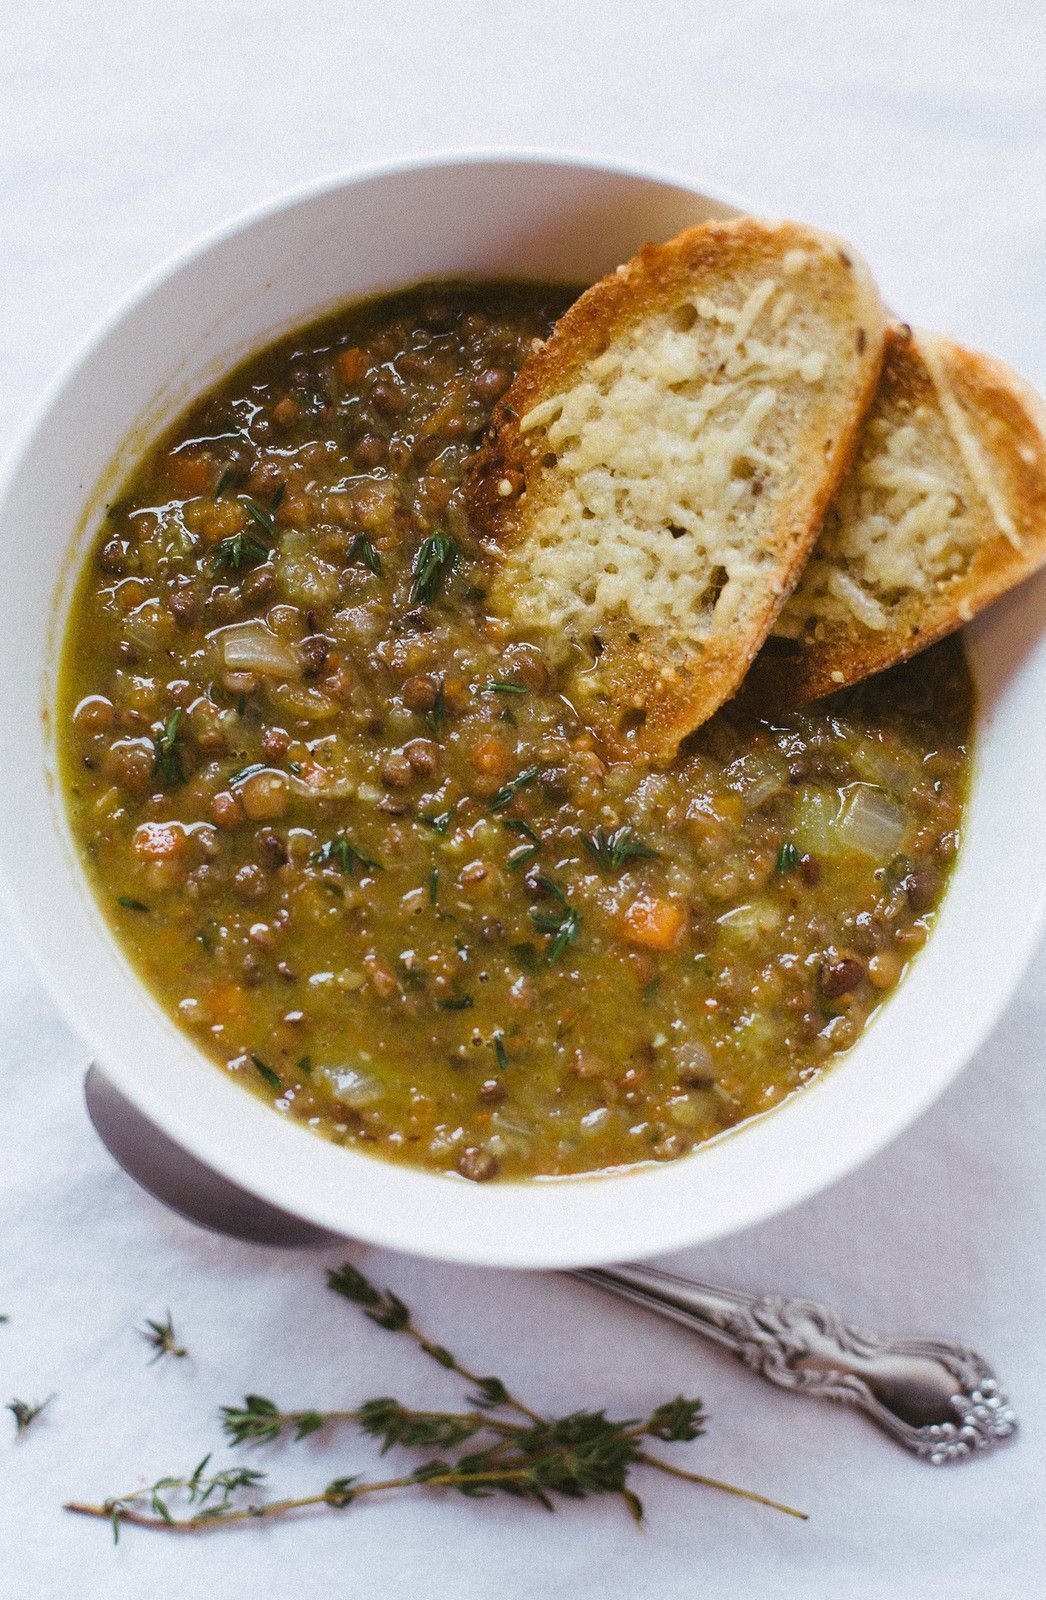 Lentil Soup is one of those powerhouse recipes that everyone needs to have in thei